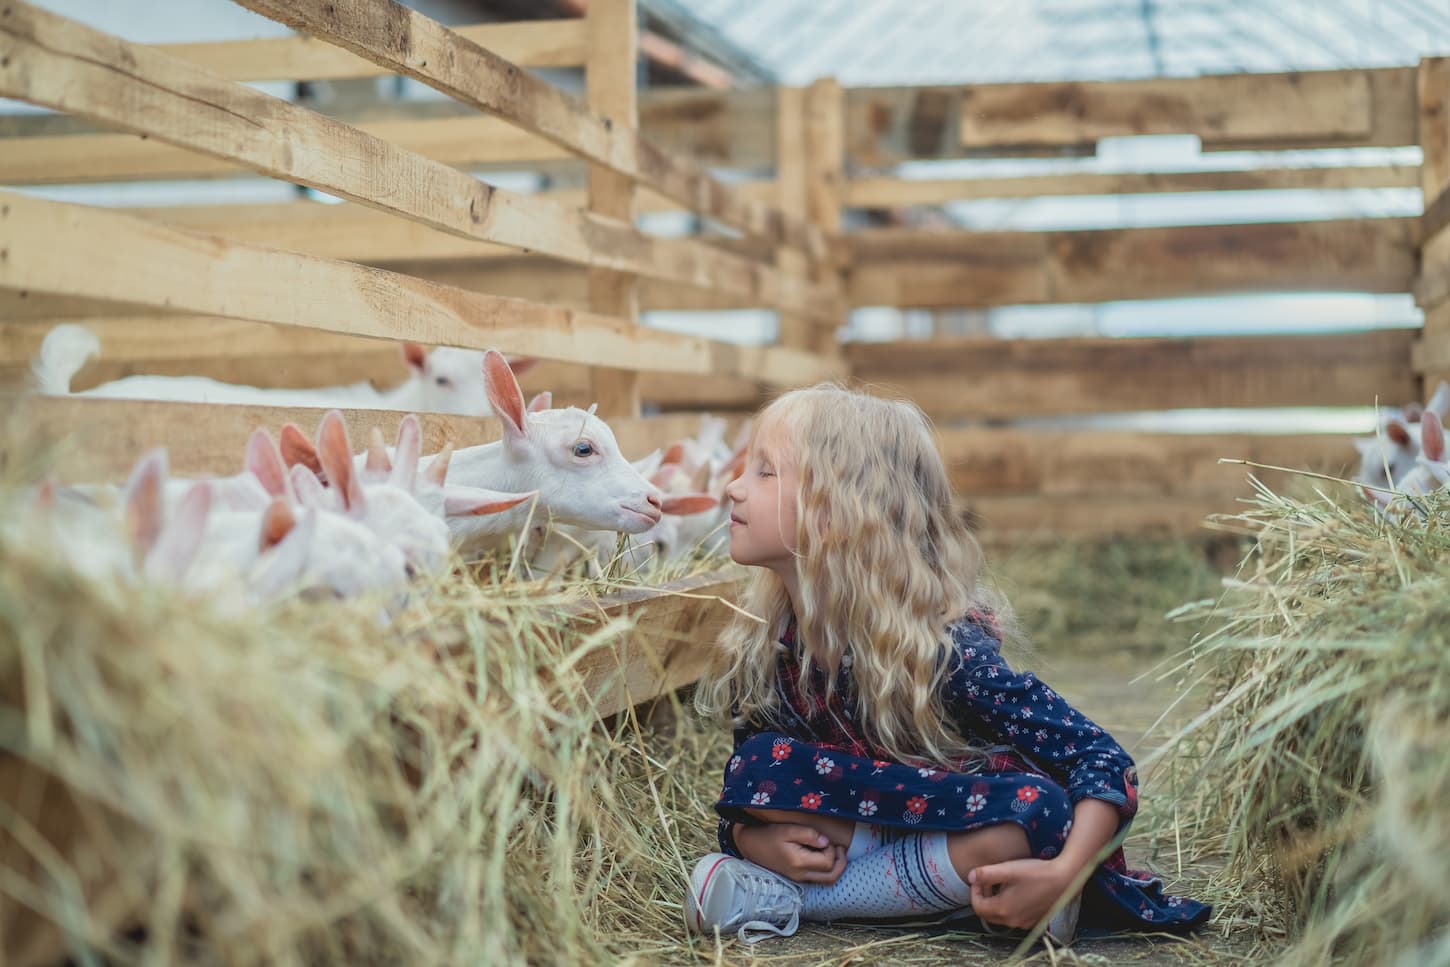 An image of a little girl kissing a little goat in a farmyard.